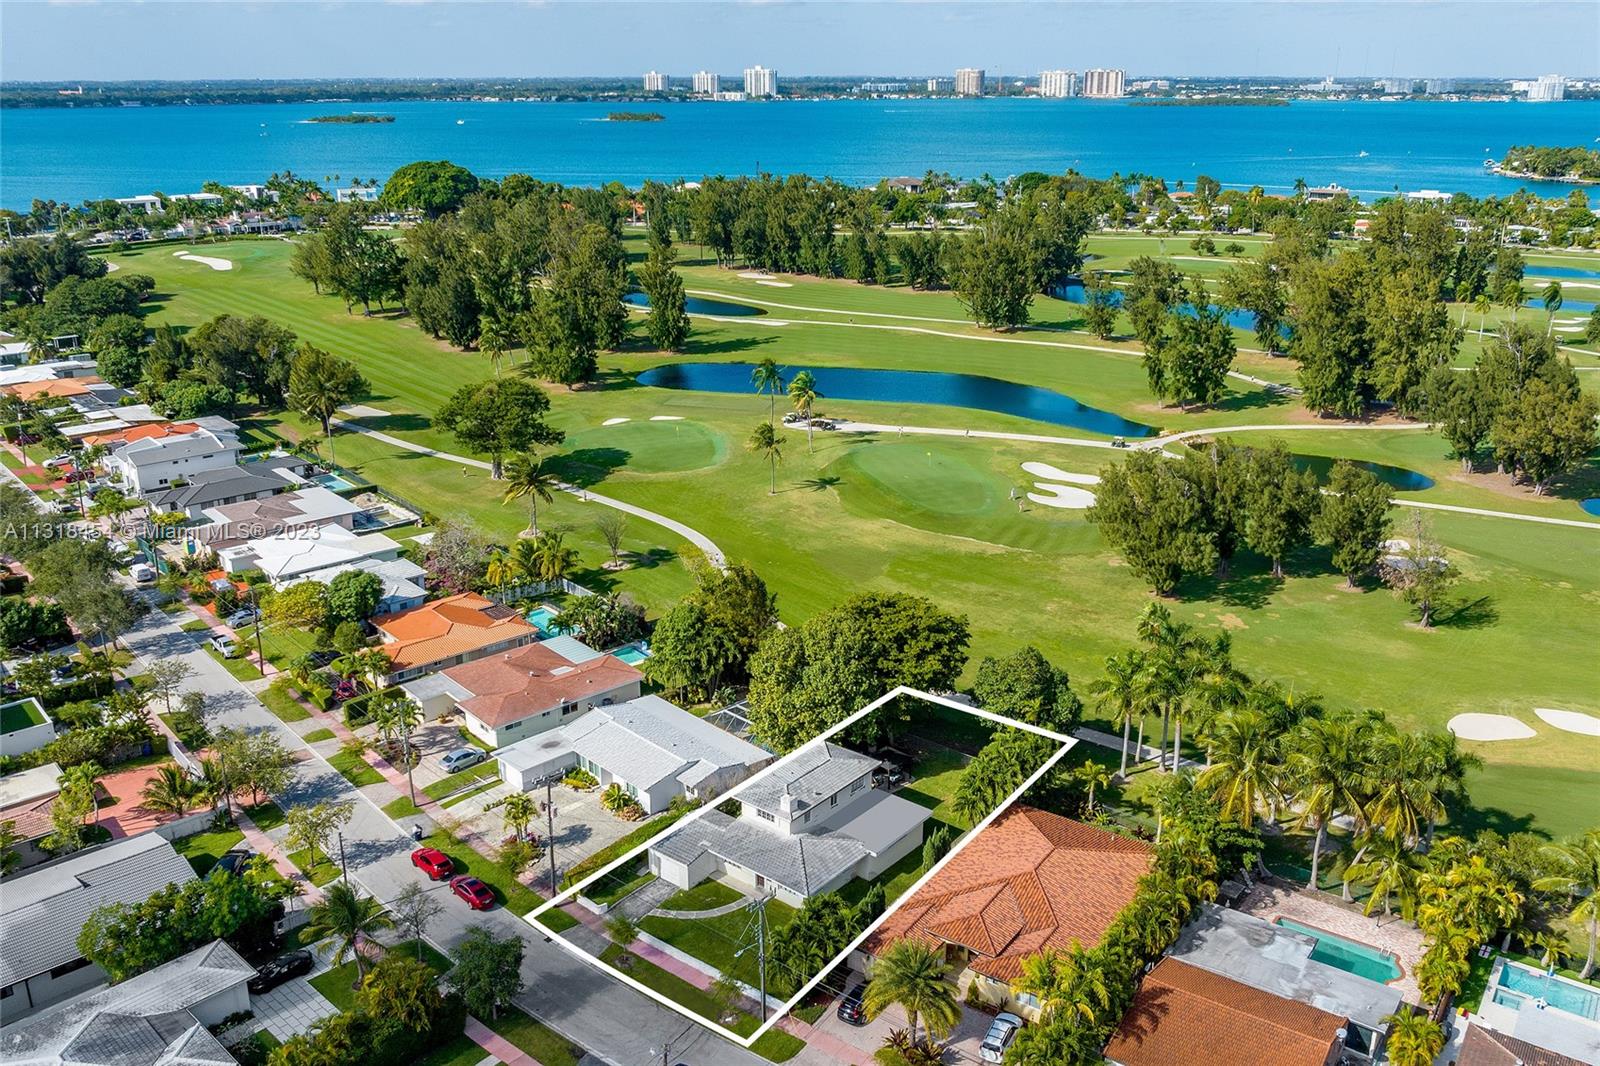 Do not miss the opportunity to build your dream home in the guard gated Normandy Shores. The property has over 8,000 sq. ft. of lot space while offering breathtaking views of the Normandy Shores Golf Course. The Island is within proximity to private schools such as Miami Country Day, and a plethora of restaurants in areas such as Bal Harbour, South Beach and the Miami Design District. Aside from the Golf Course, the island provides additional amenities such as tennis courts, a children's playground, and a Clubhouse. Plans are available for a 4,000 Sqft 5 Bedroom / 5 + 1 Bathroom home, featuring an oversized indoor/outdoor kitchen, pool with spa and sun deck, and 3 terraces.